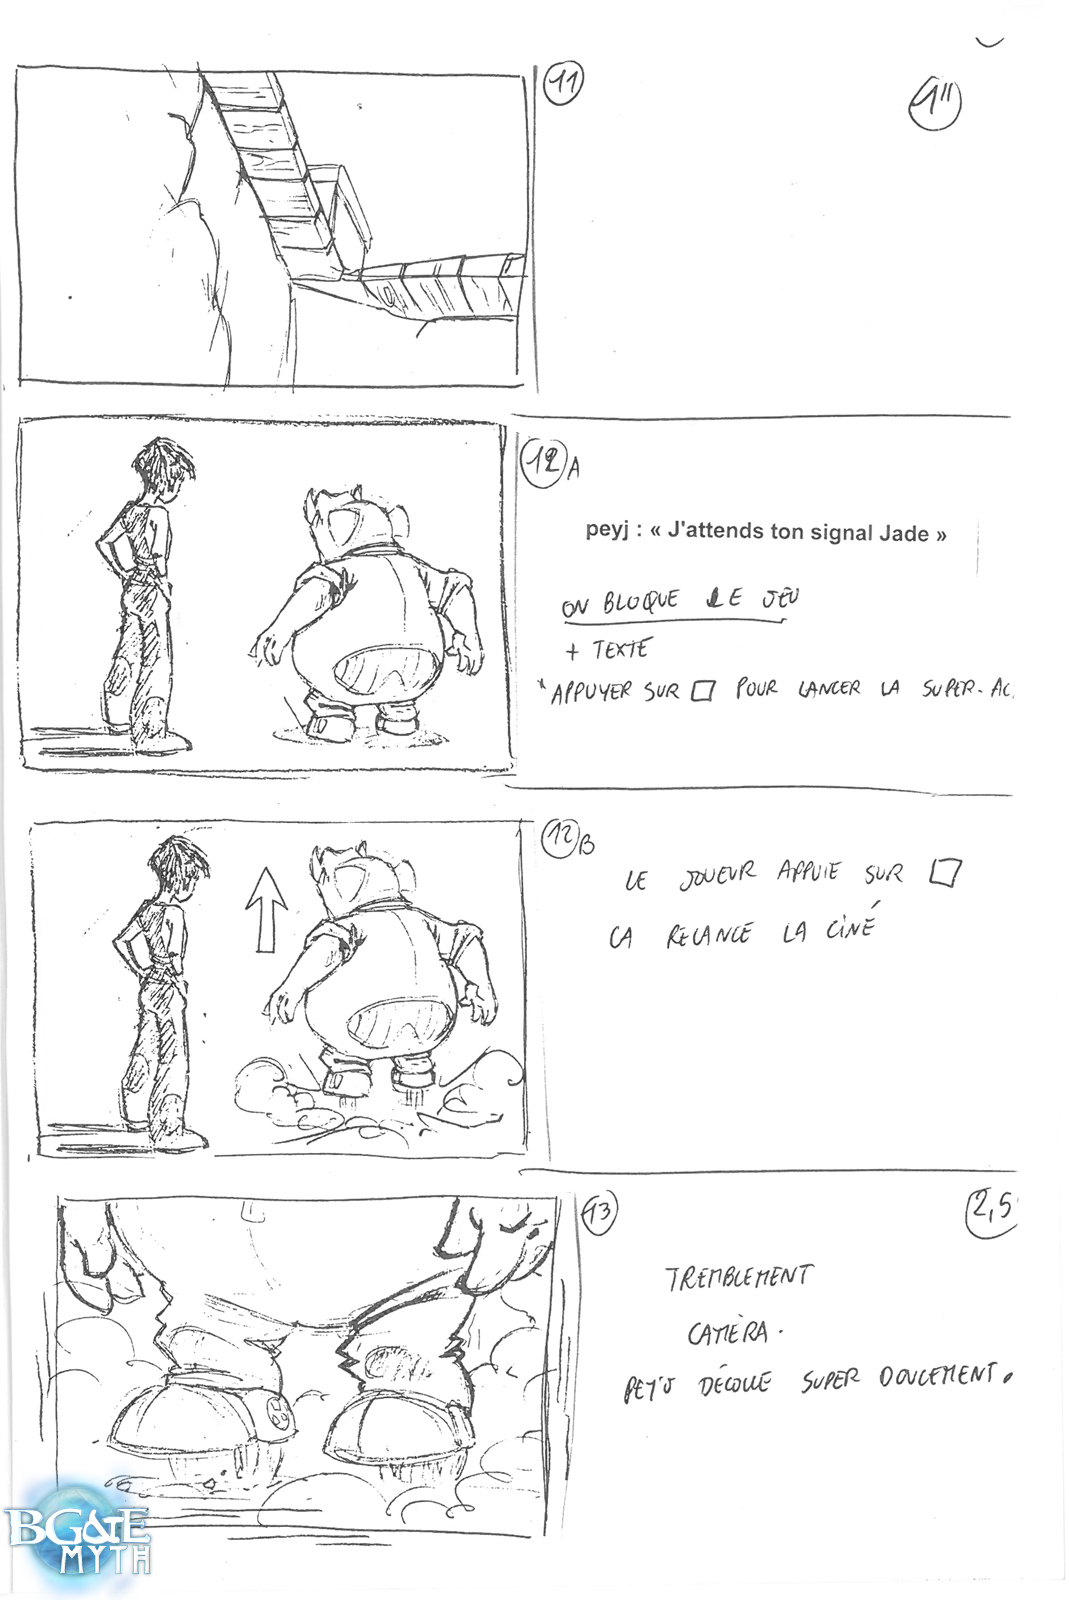 [Storyboard] Les Jet-boots - Page 4